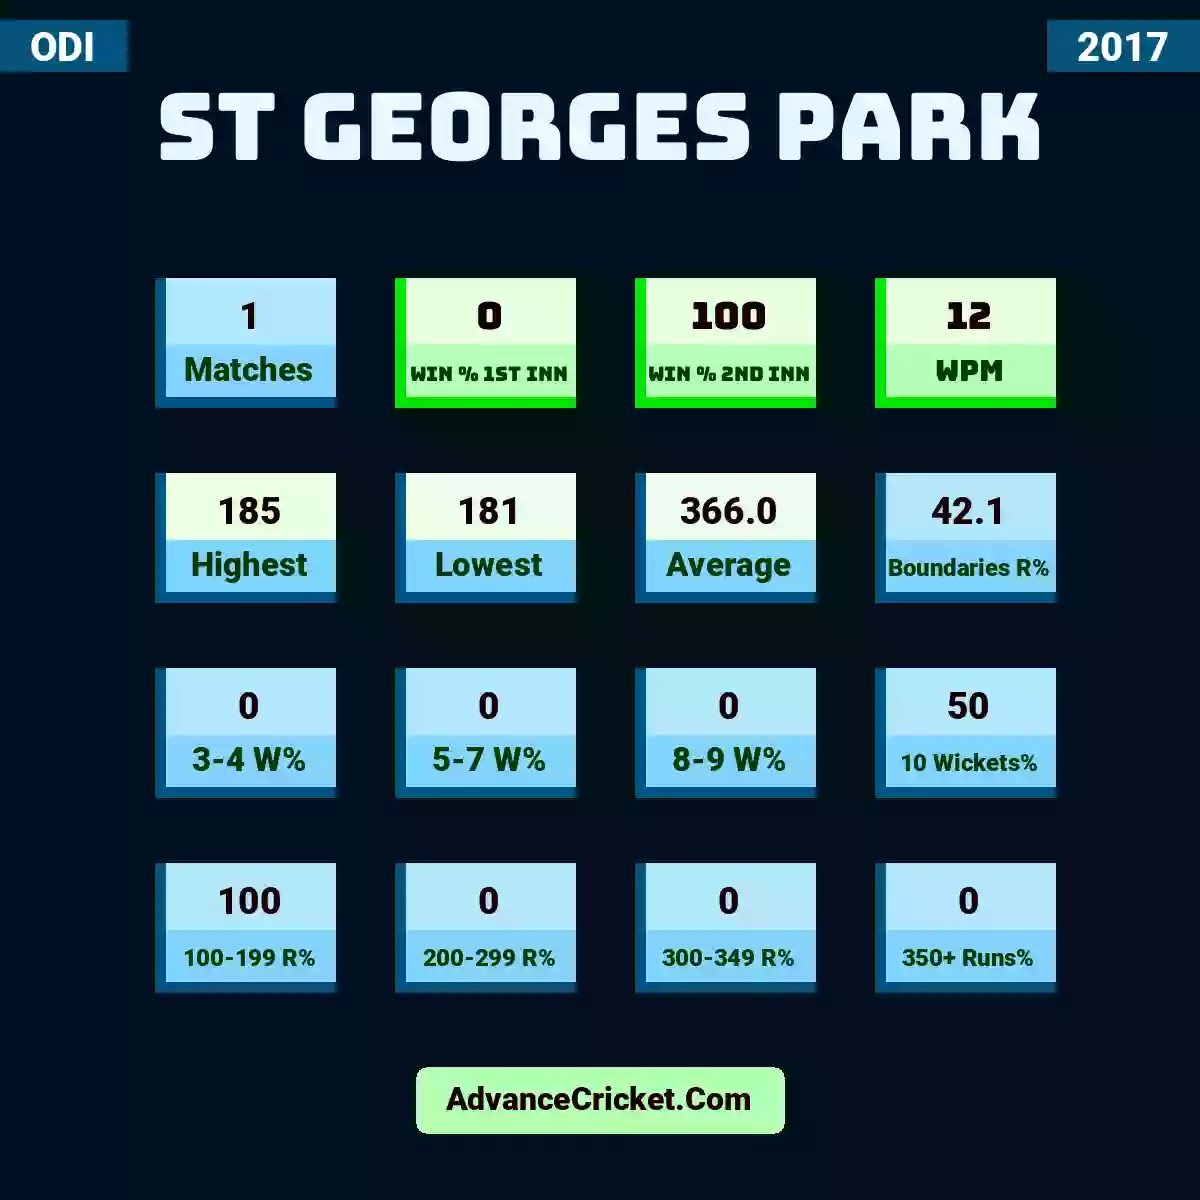 Image showing St Georges Park with Matches: 1, Win % 1st Inn: 0, Win % 2nd Inn: 100, WPM: 12, Highest: 185, Lowest: 181, Average: 366.0, Boundaries R%: 42.1, 3-4 W%: 0, 5-7 W%: 0, 8-9 W%: 0, 10 Wickets%: 50, 100-199 R%: 100, 200-299 R%: 0, 300-349 R%: 0, 350+ Runs%: 0.